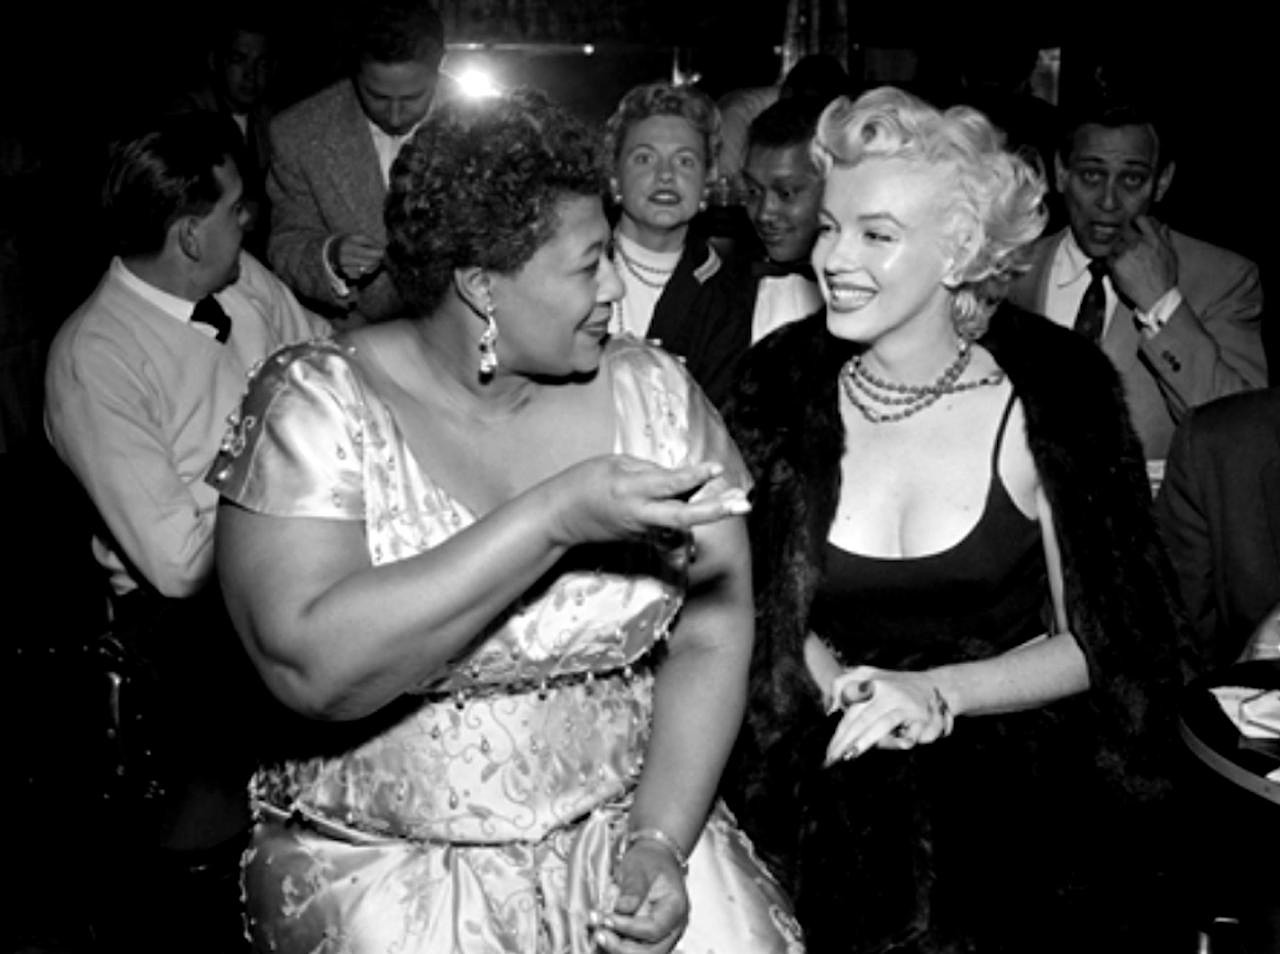 Marilyn Monroe with Ella Fitzgerald at the the Mocambo. A popular Hollywood night club at the time.